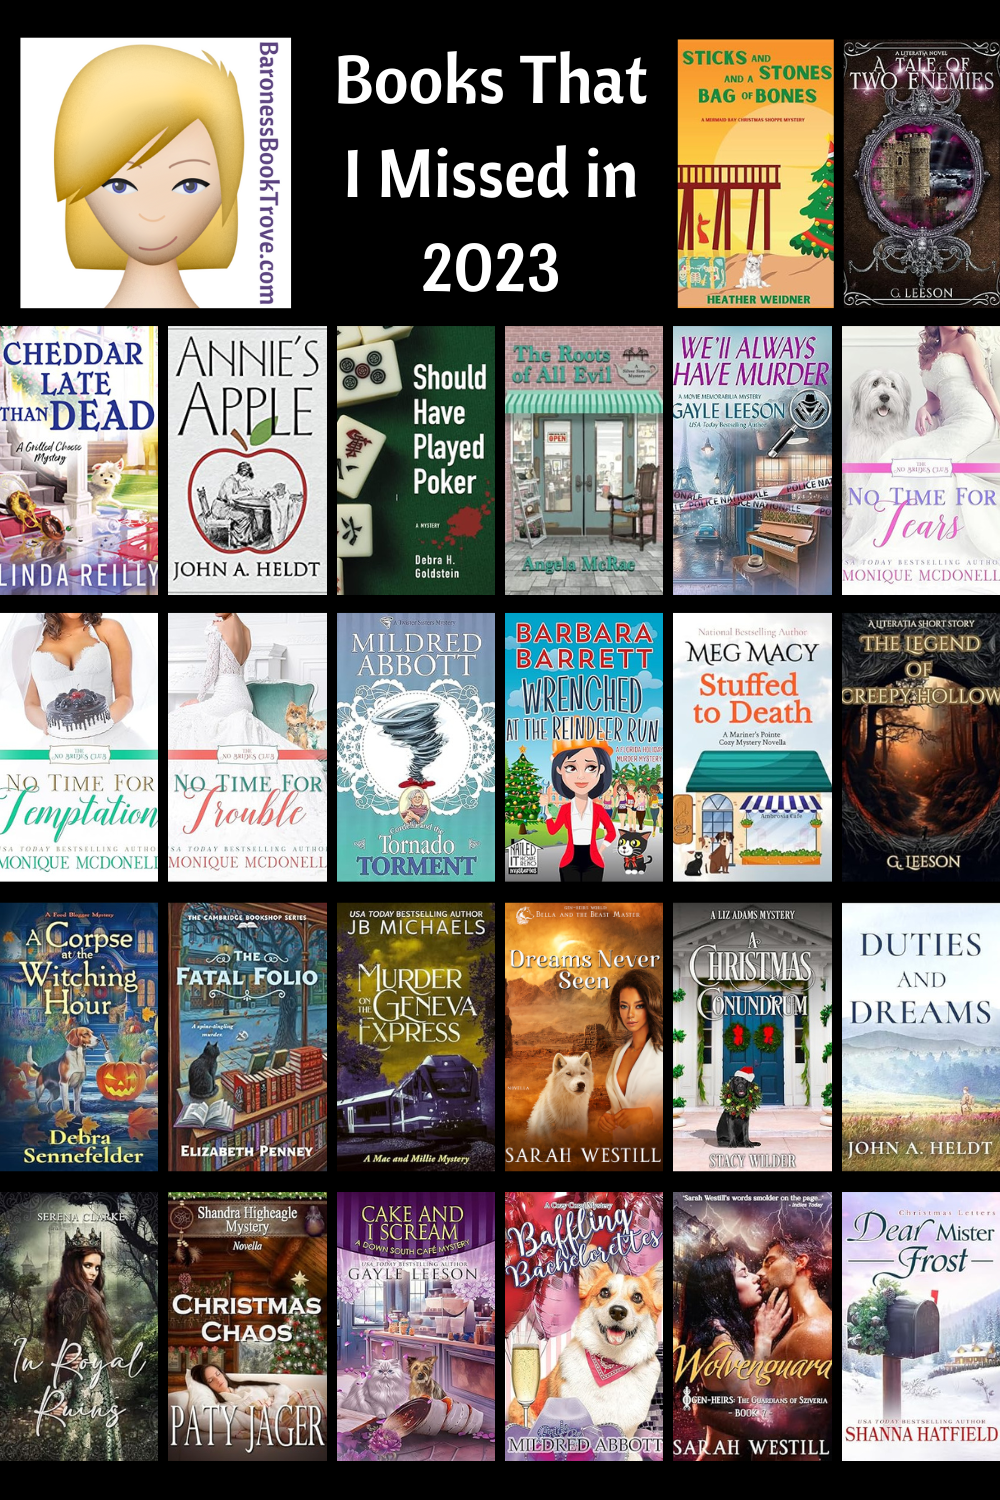 Books That I Missed in 2023